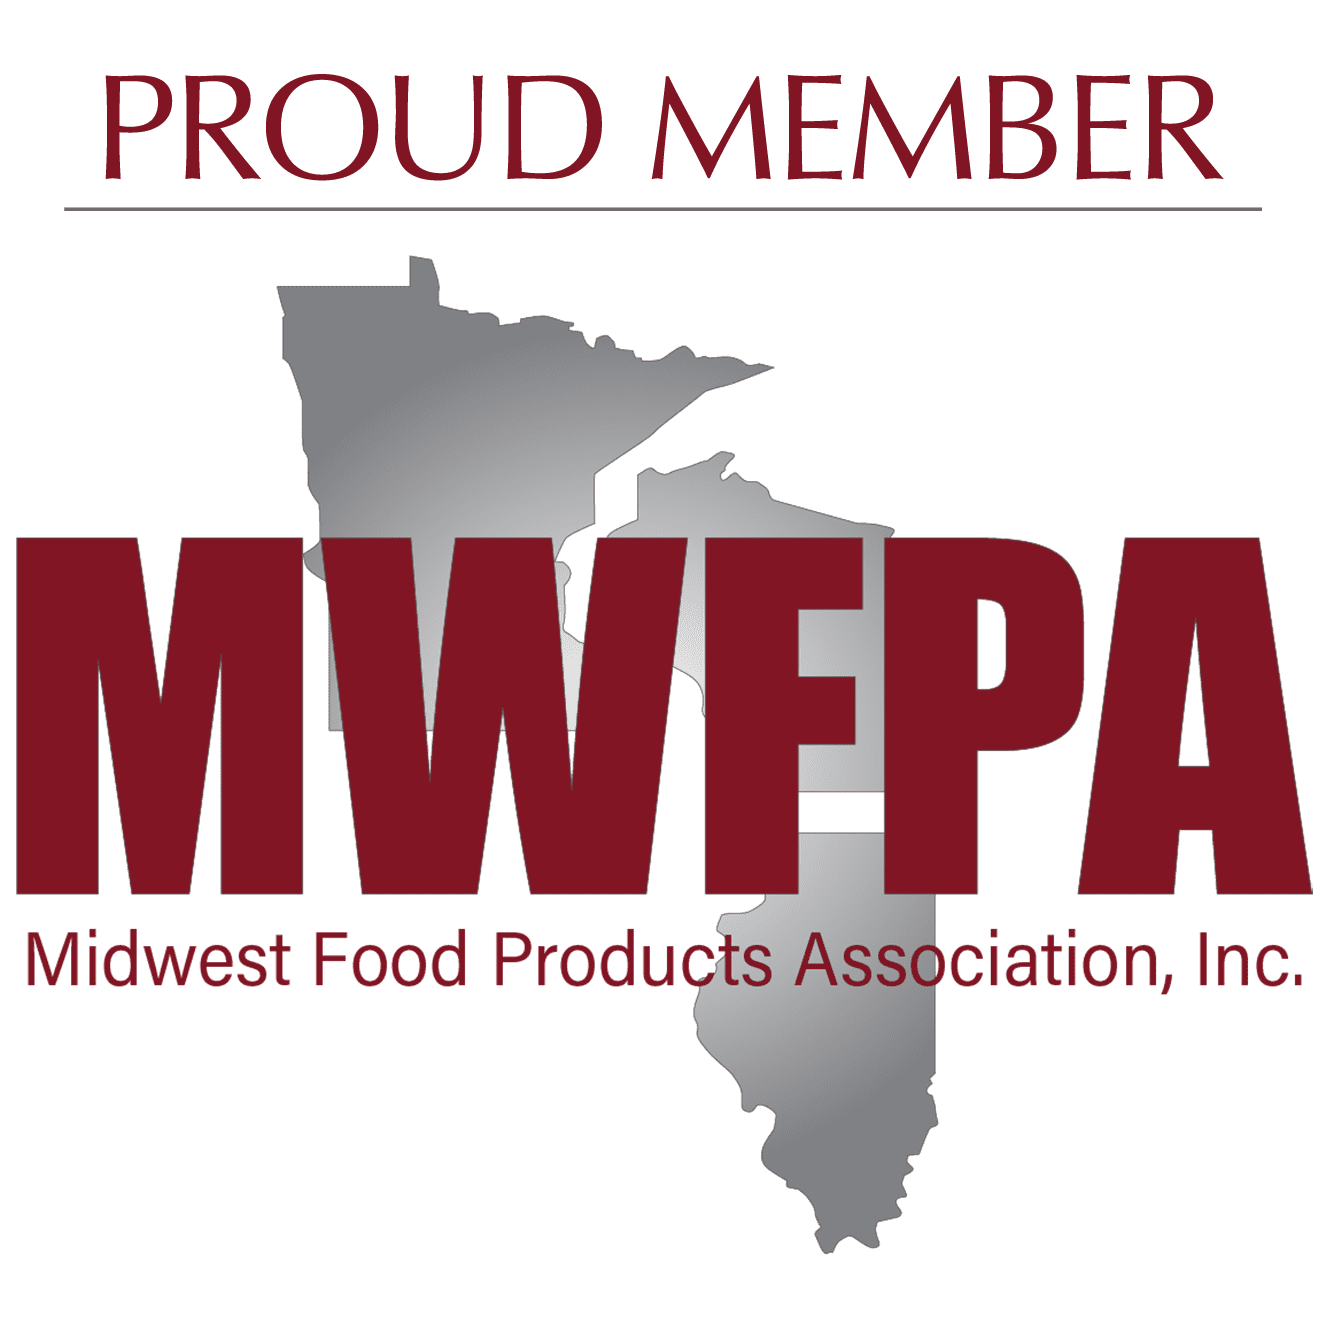 Midwest food products association logo